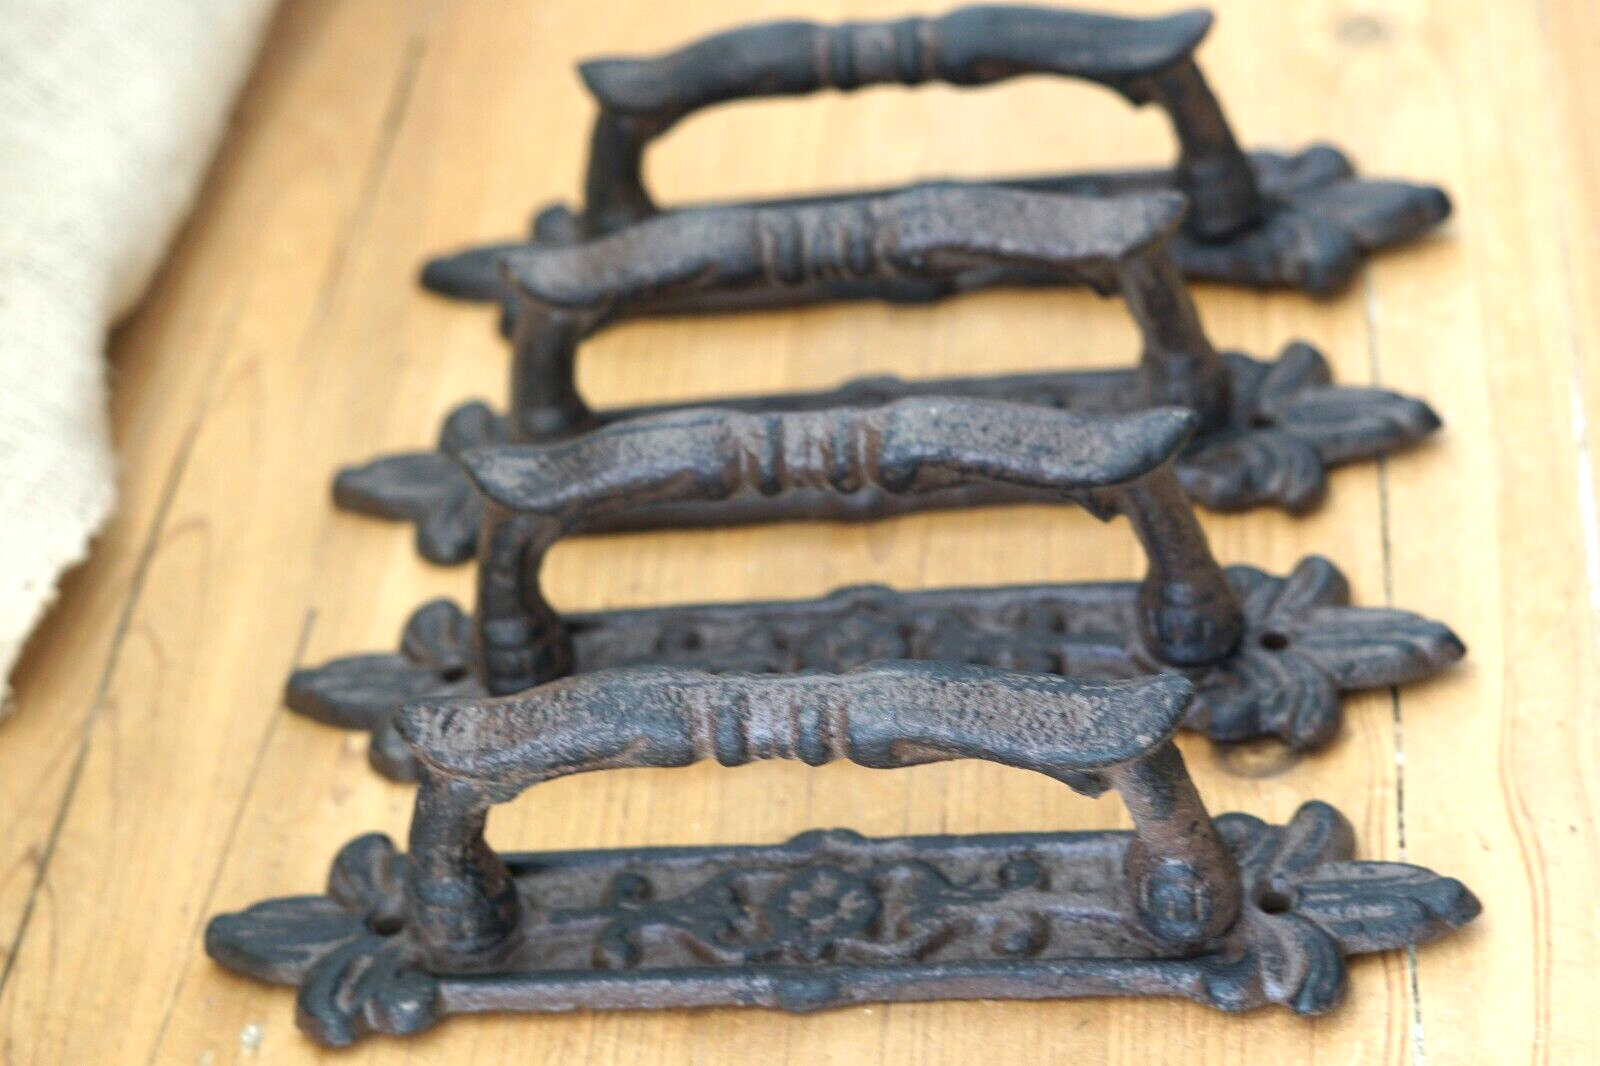 Primary image for 4 Cast Iron Antique Style Barn Handles Gate Pull Shed Door Handles Pulls Garden